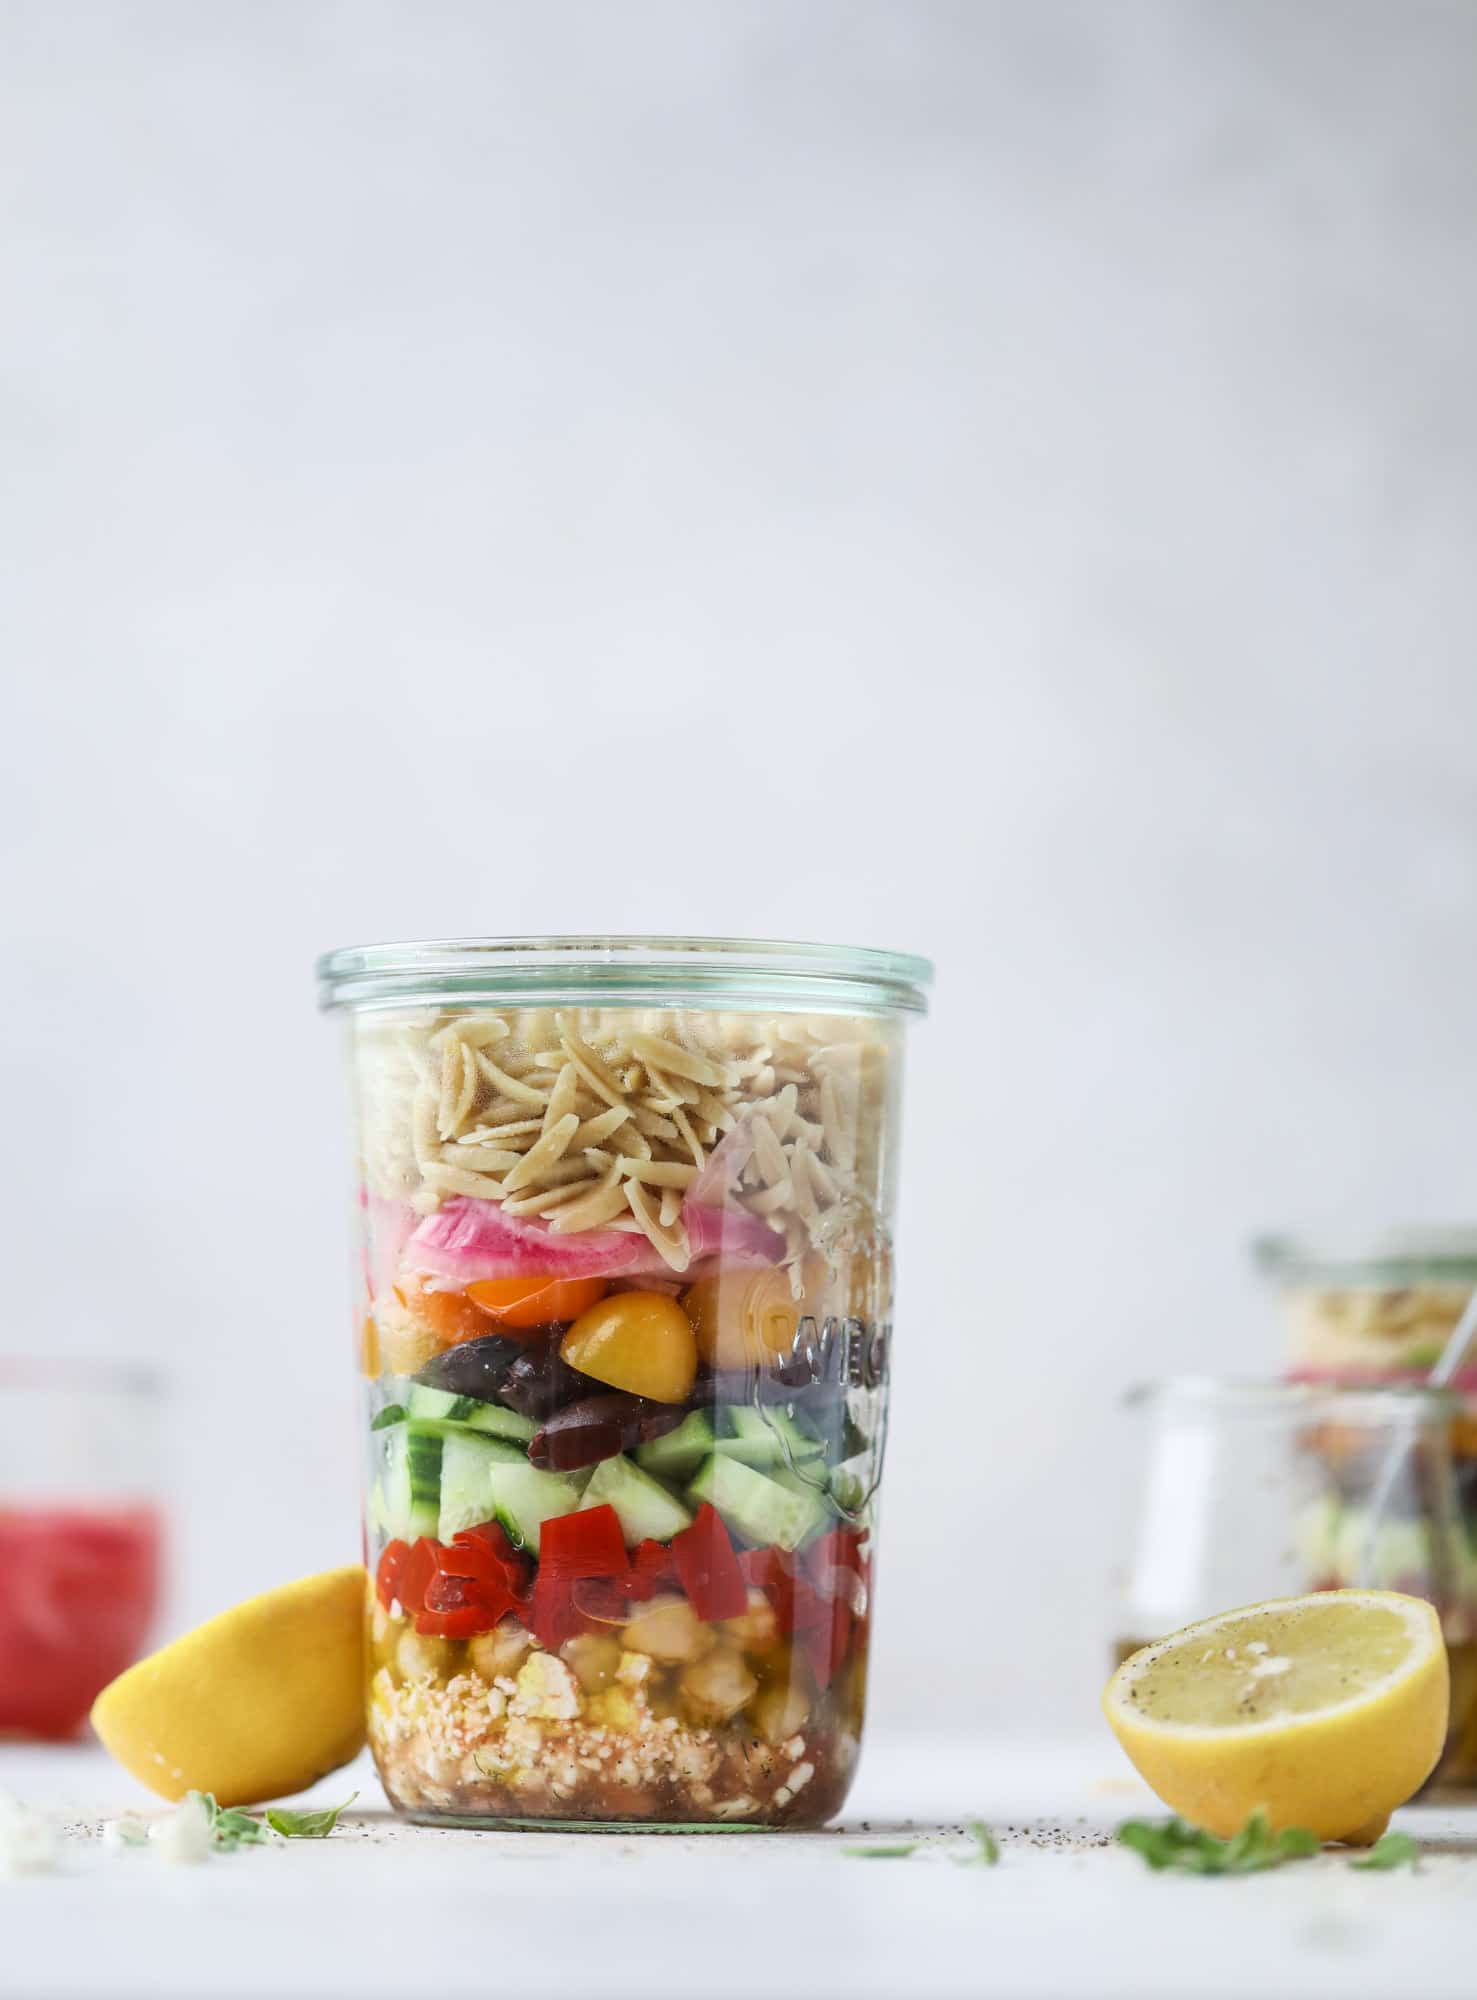 This incredible greek orzo salad in a jar is to die for! The recipe is so easy and flavorful, super satisfying and perfect for meal prep. This salad in a jar is a delicious lunch idea for the weekdays and keeps you feeling full and happy! I howsweeteats.com #salad #jar #greek #orzo #recipes #healthy #lunch #mealprep